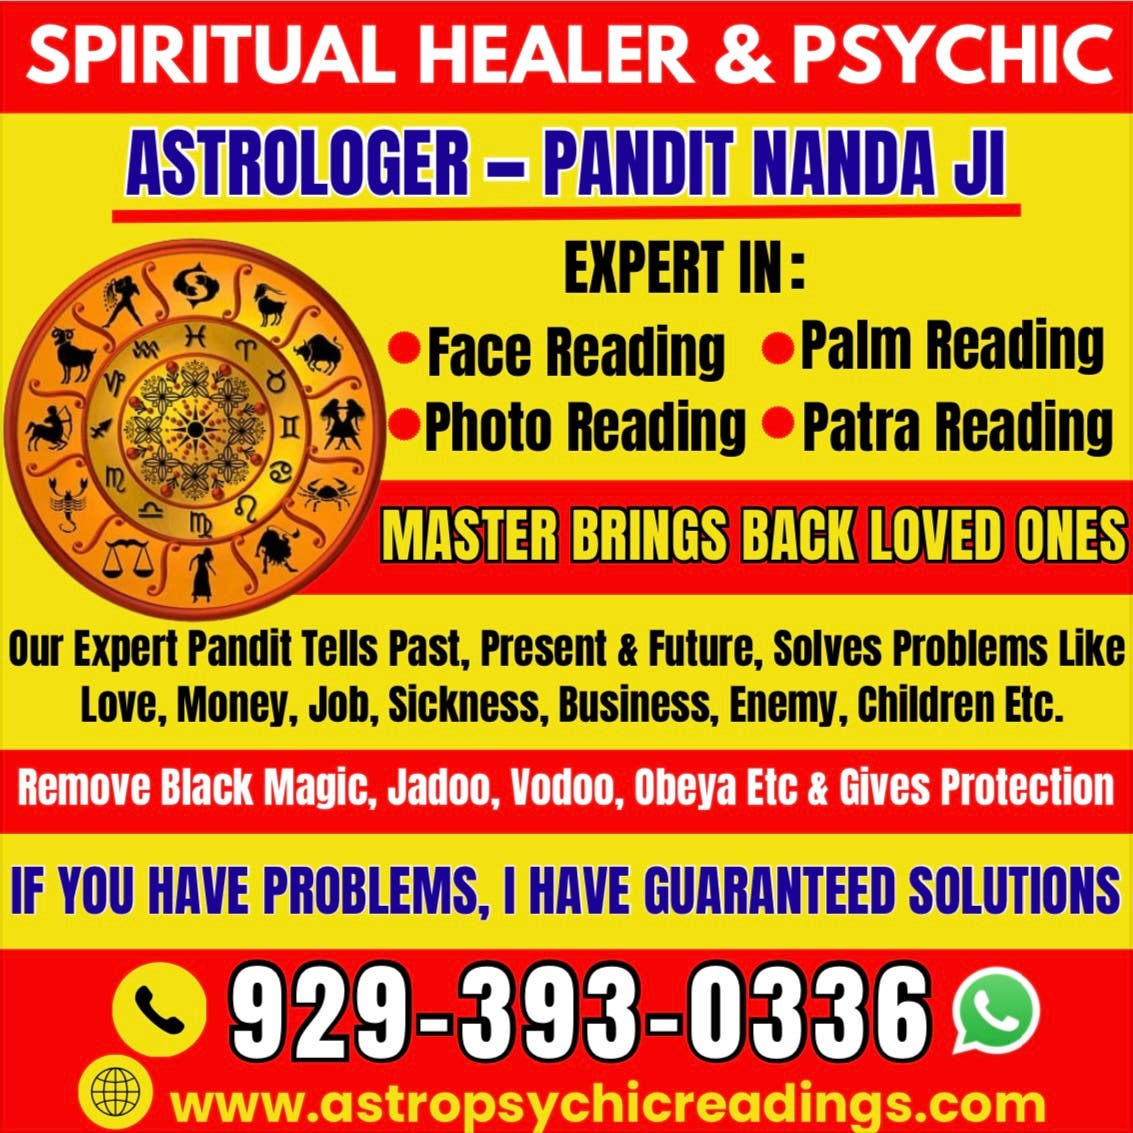  Set yourself free from all Negative Energies, Black Magic, Evil Eye & Bad Spirit now +1929-393-0336